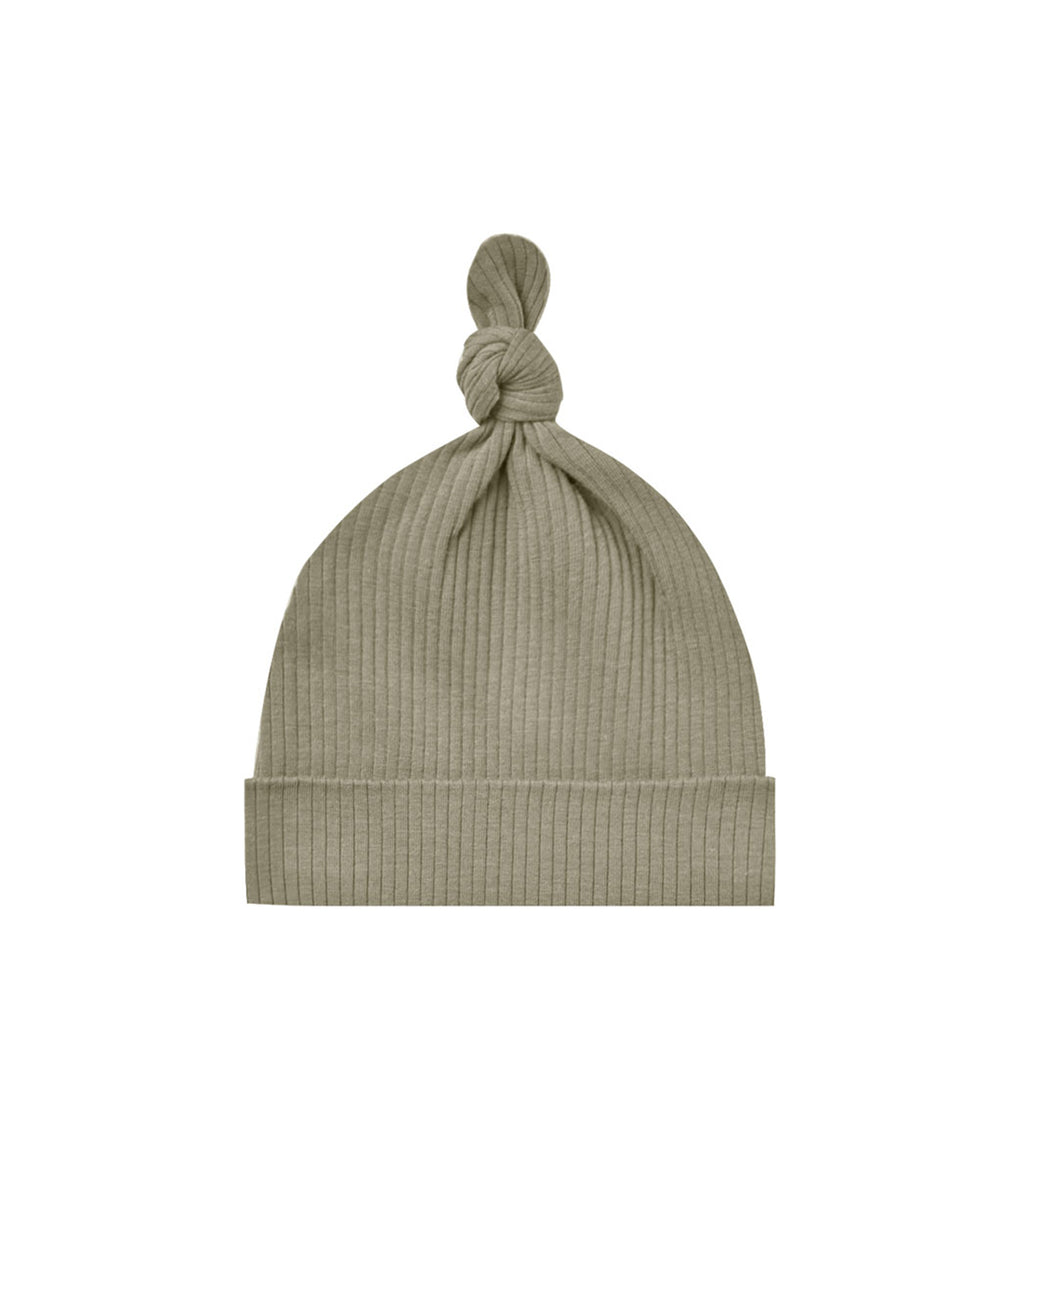 Ribbed Knotted Baby Hat – Fern